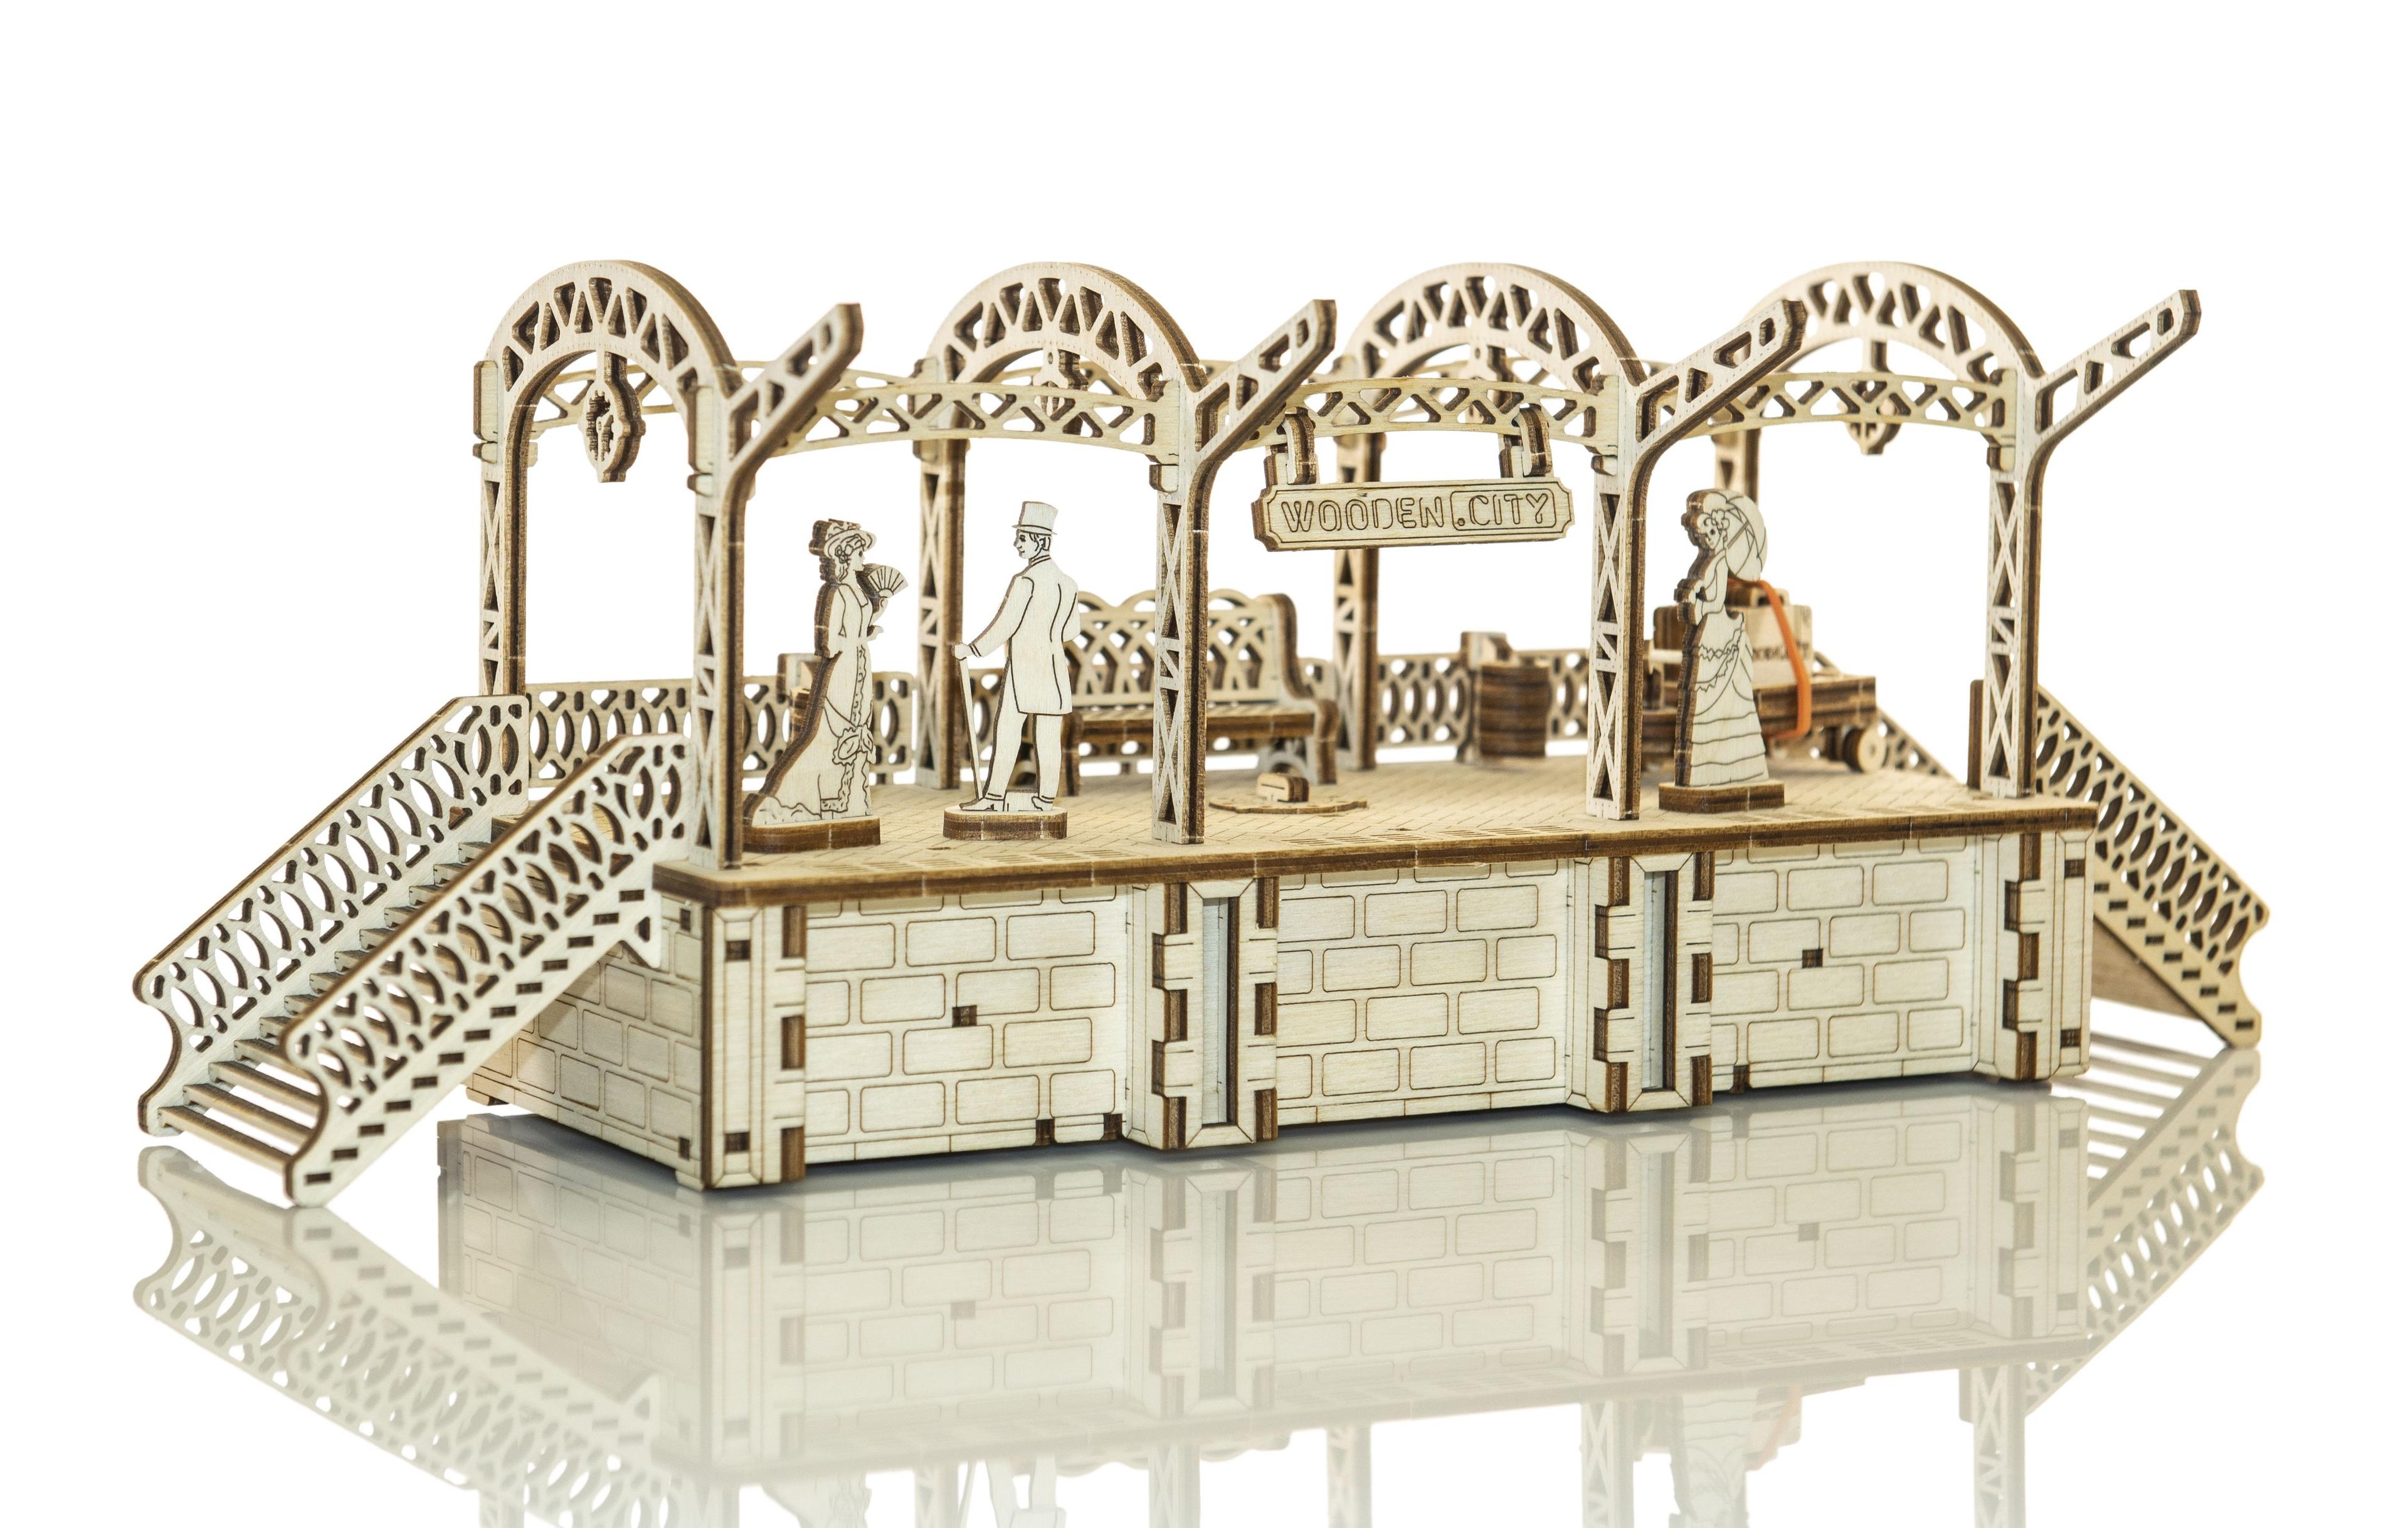 Wooden 3D Puzzle - Railway Station